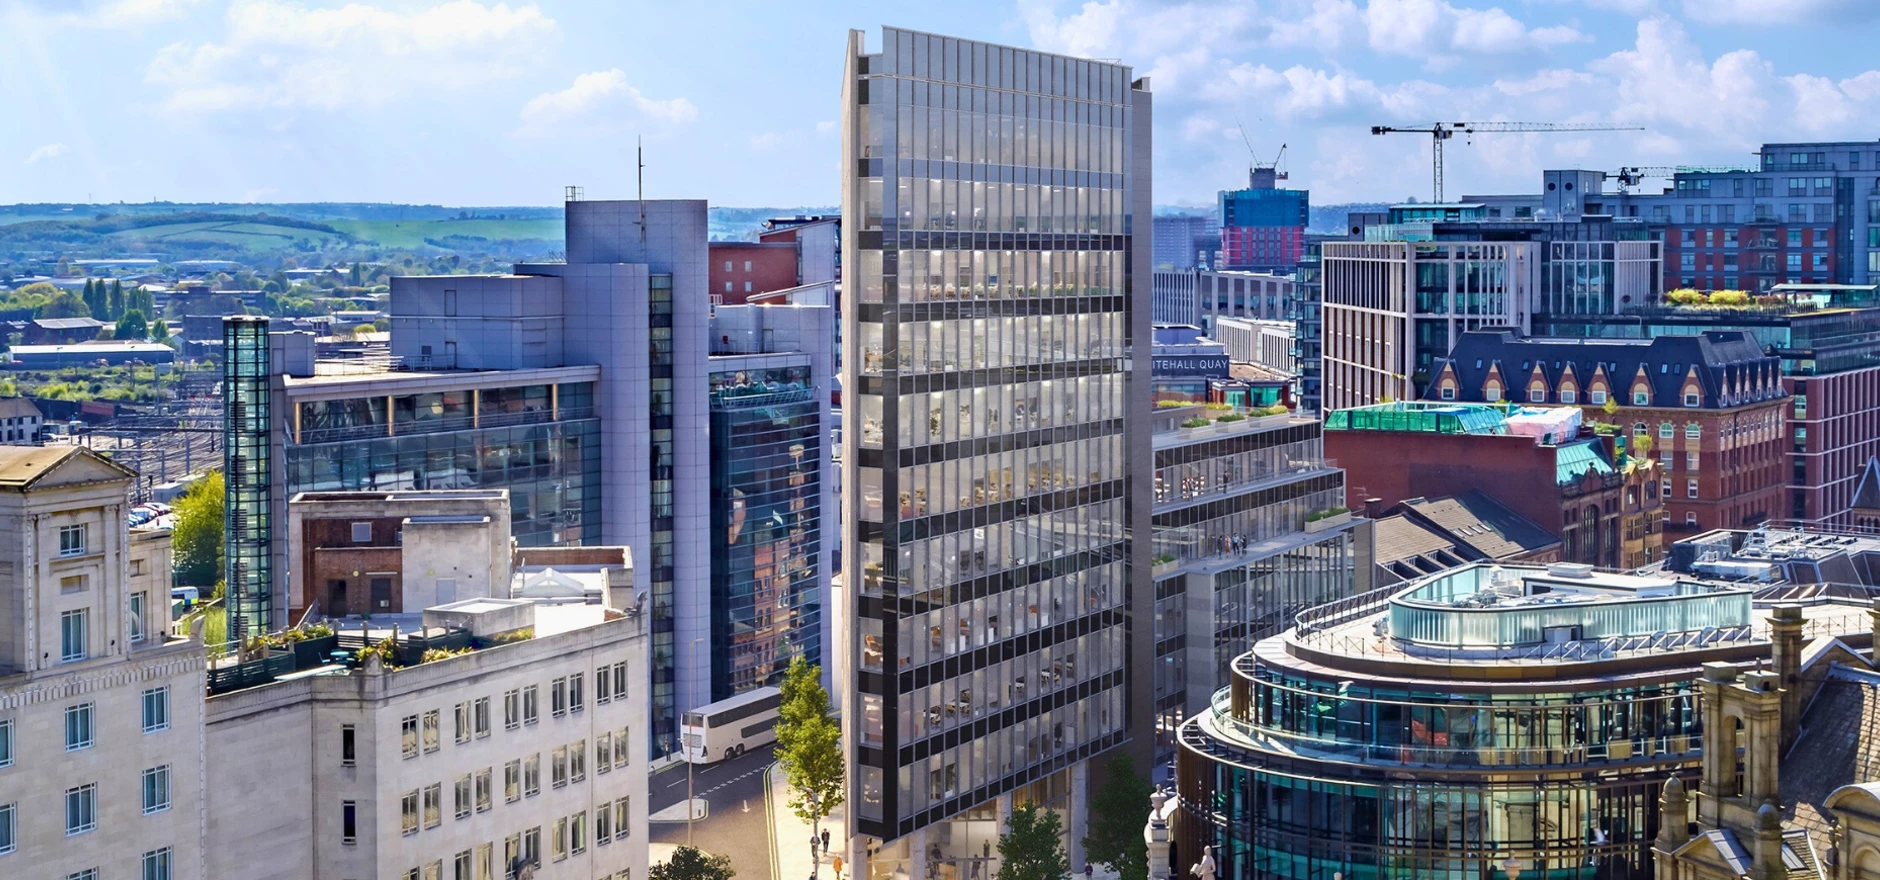 City Square House, the new Grade A office building in central Leeds